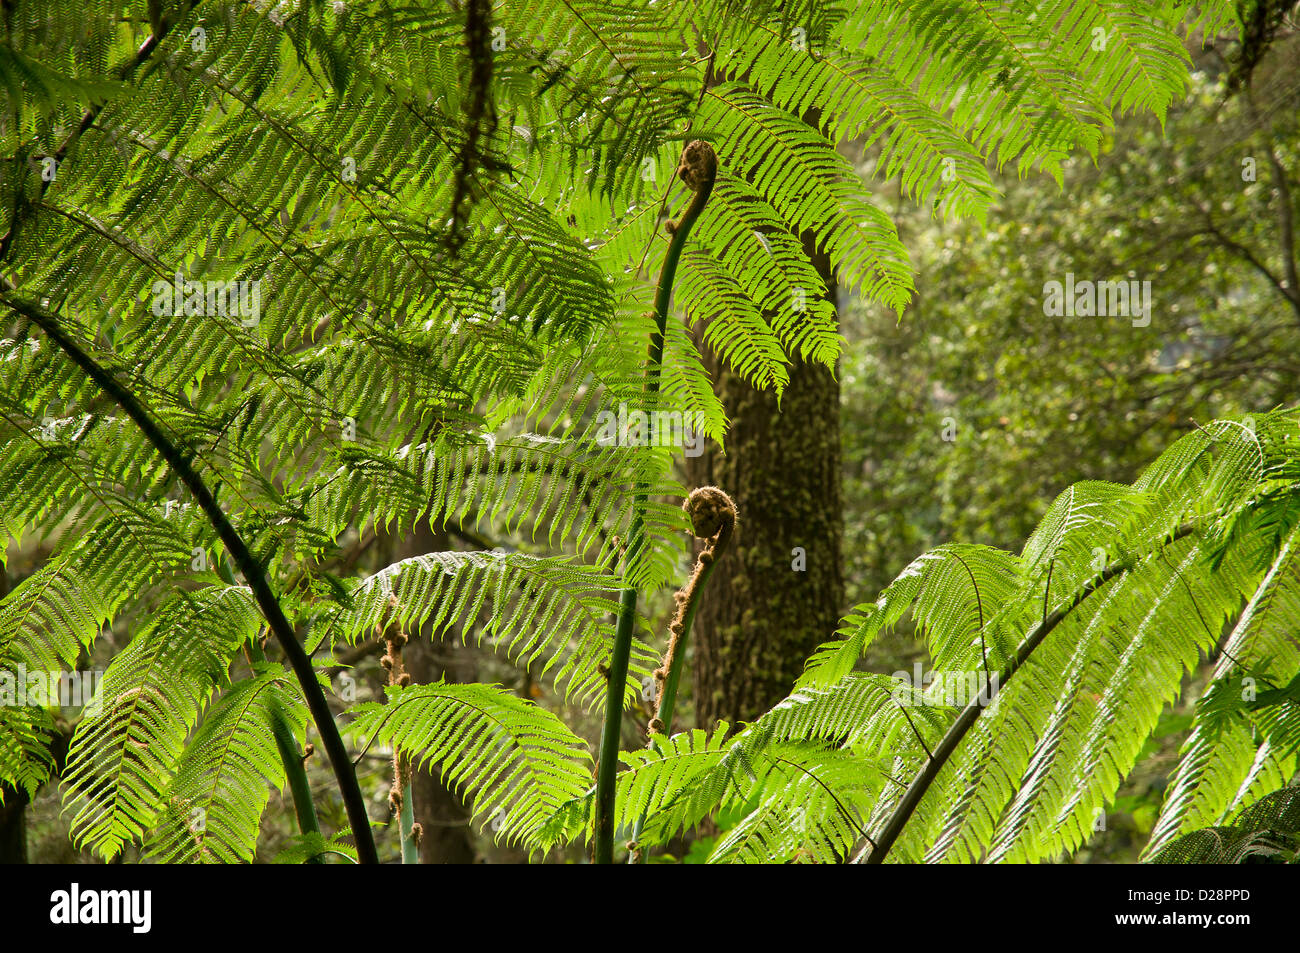 leafs of Ferns (Pteridophyta) Stock Photo